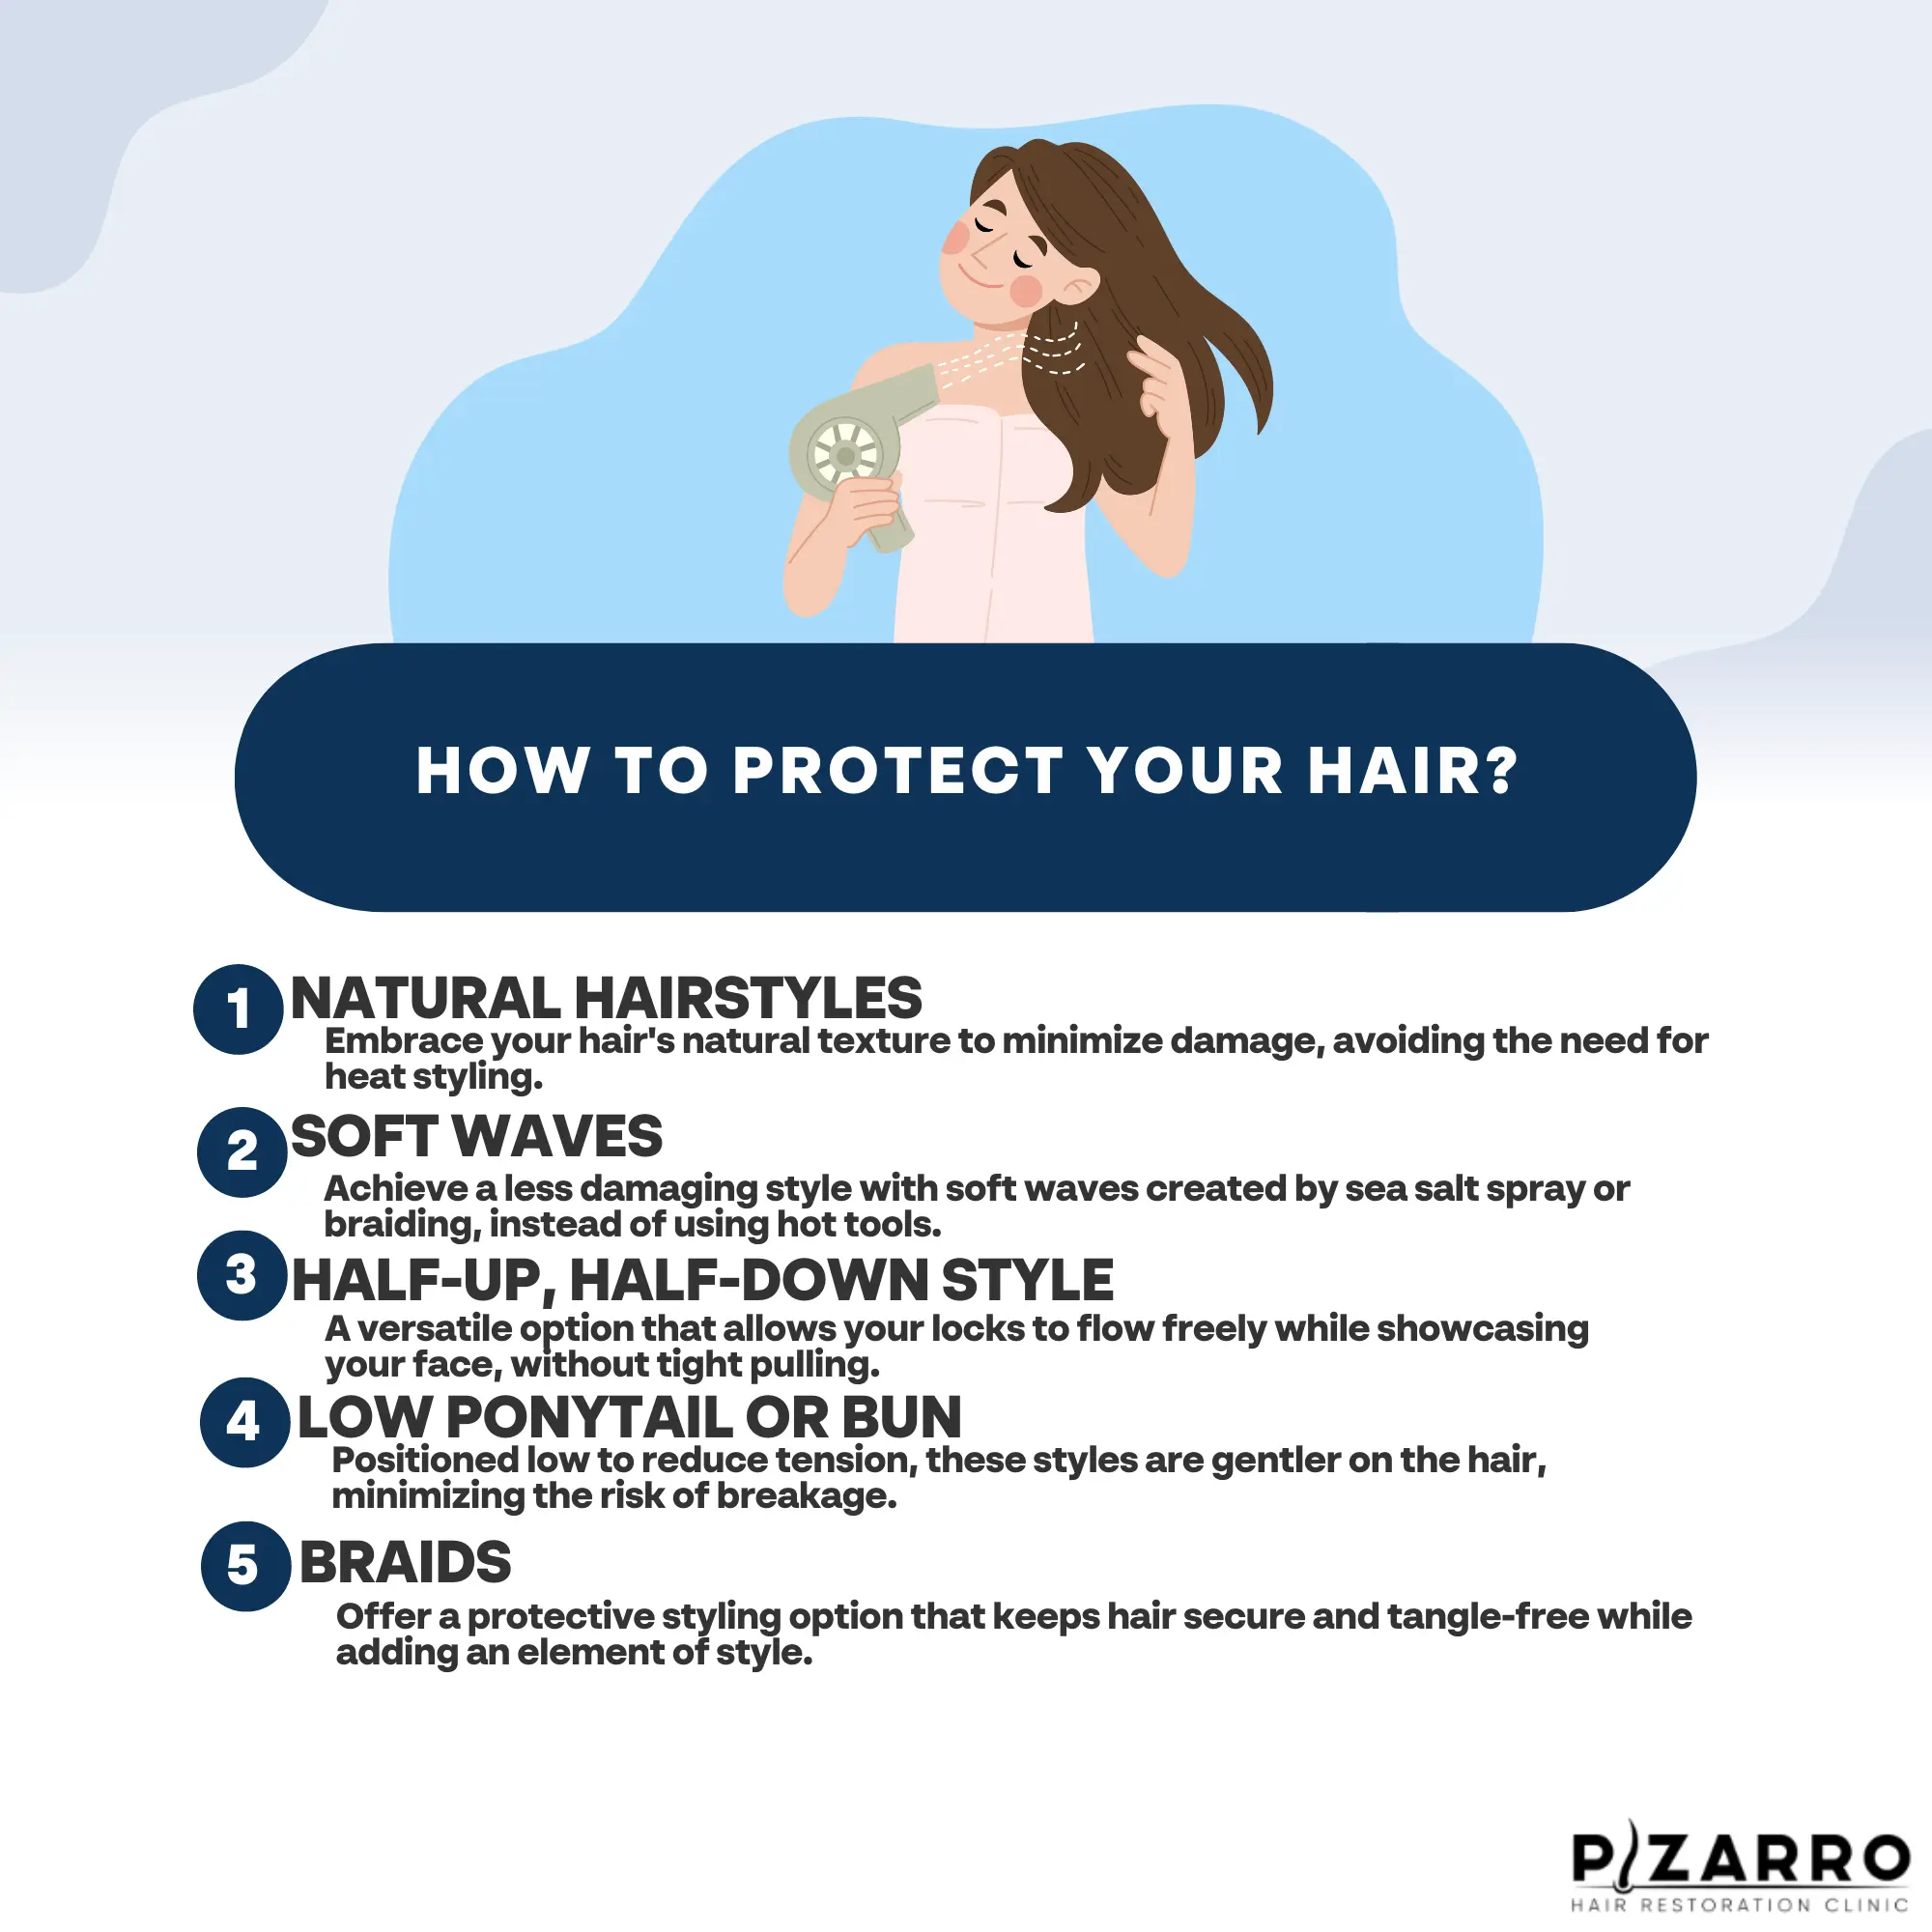 How to Protect Hair: Avoiding Damaging Hairstyles and Habits | PHR